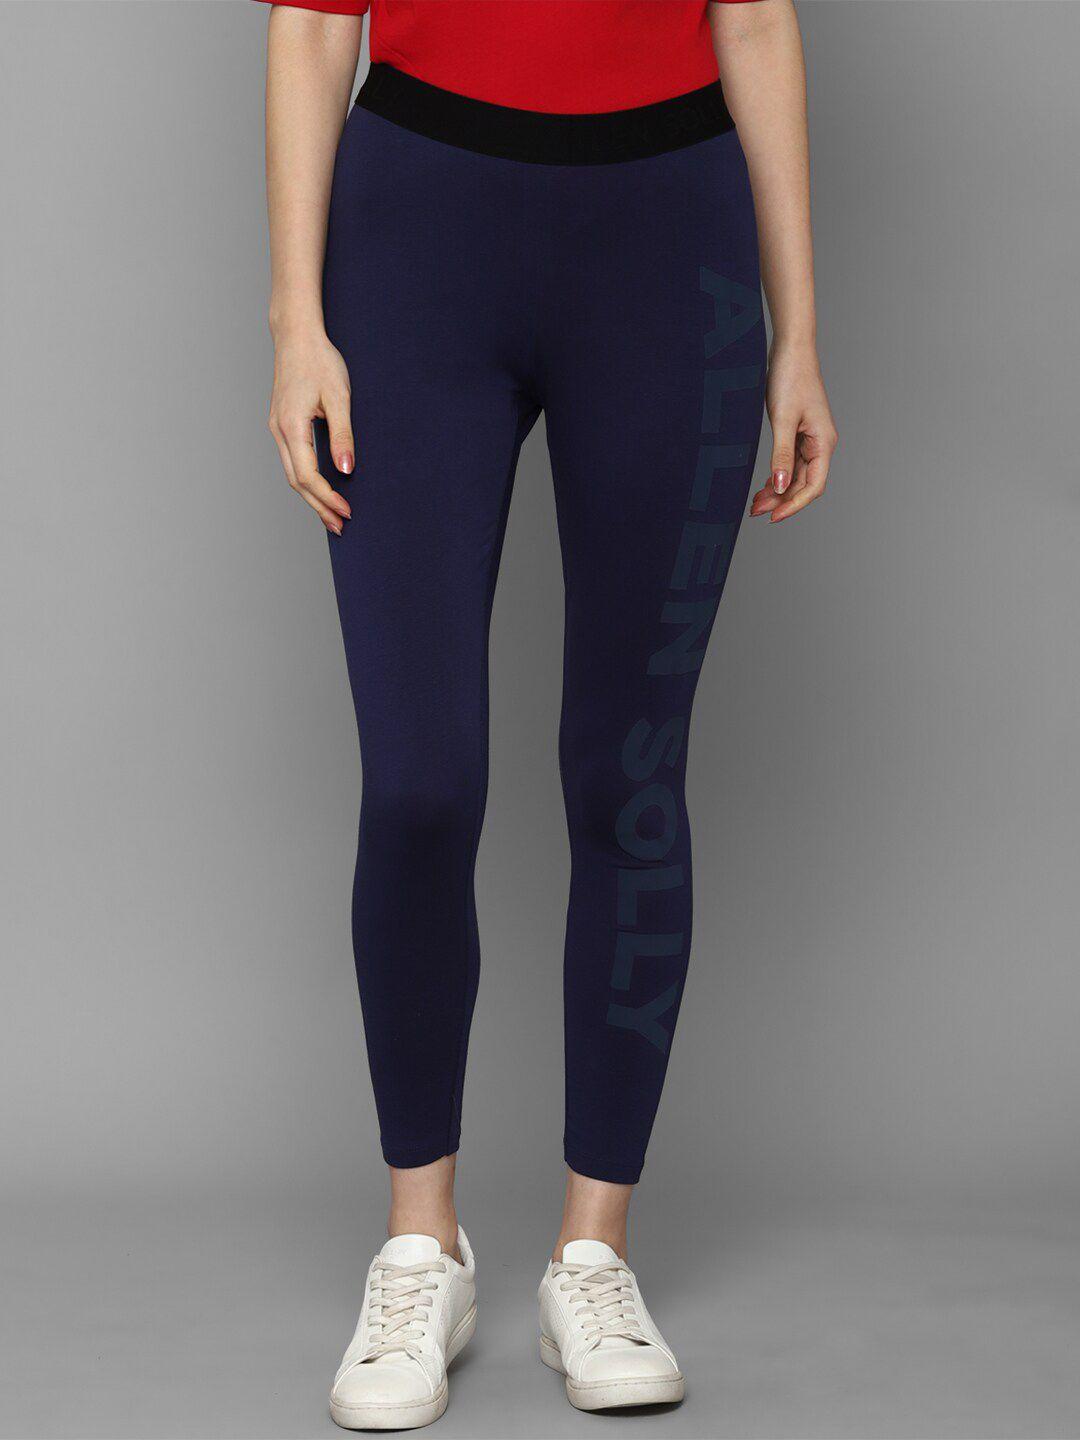 allen-solly-woman-women-navy-blue-printed-tights